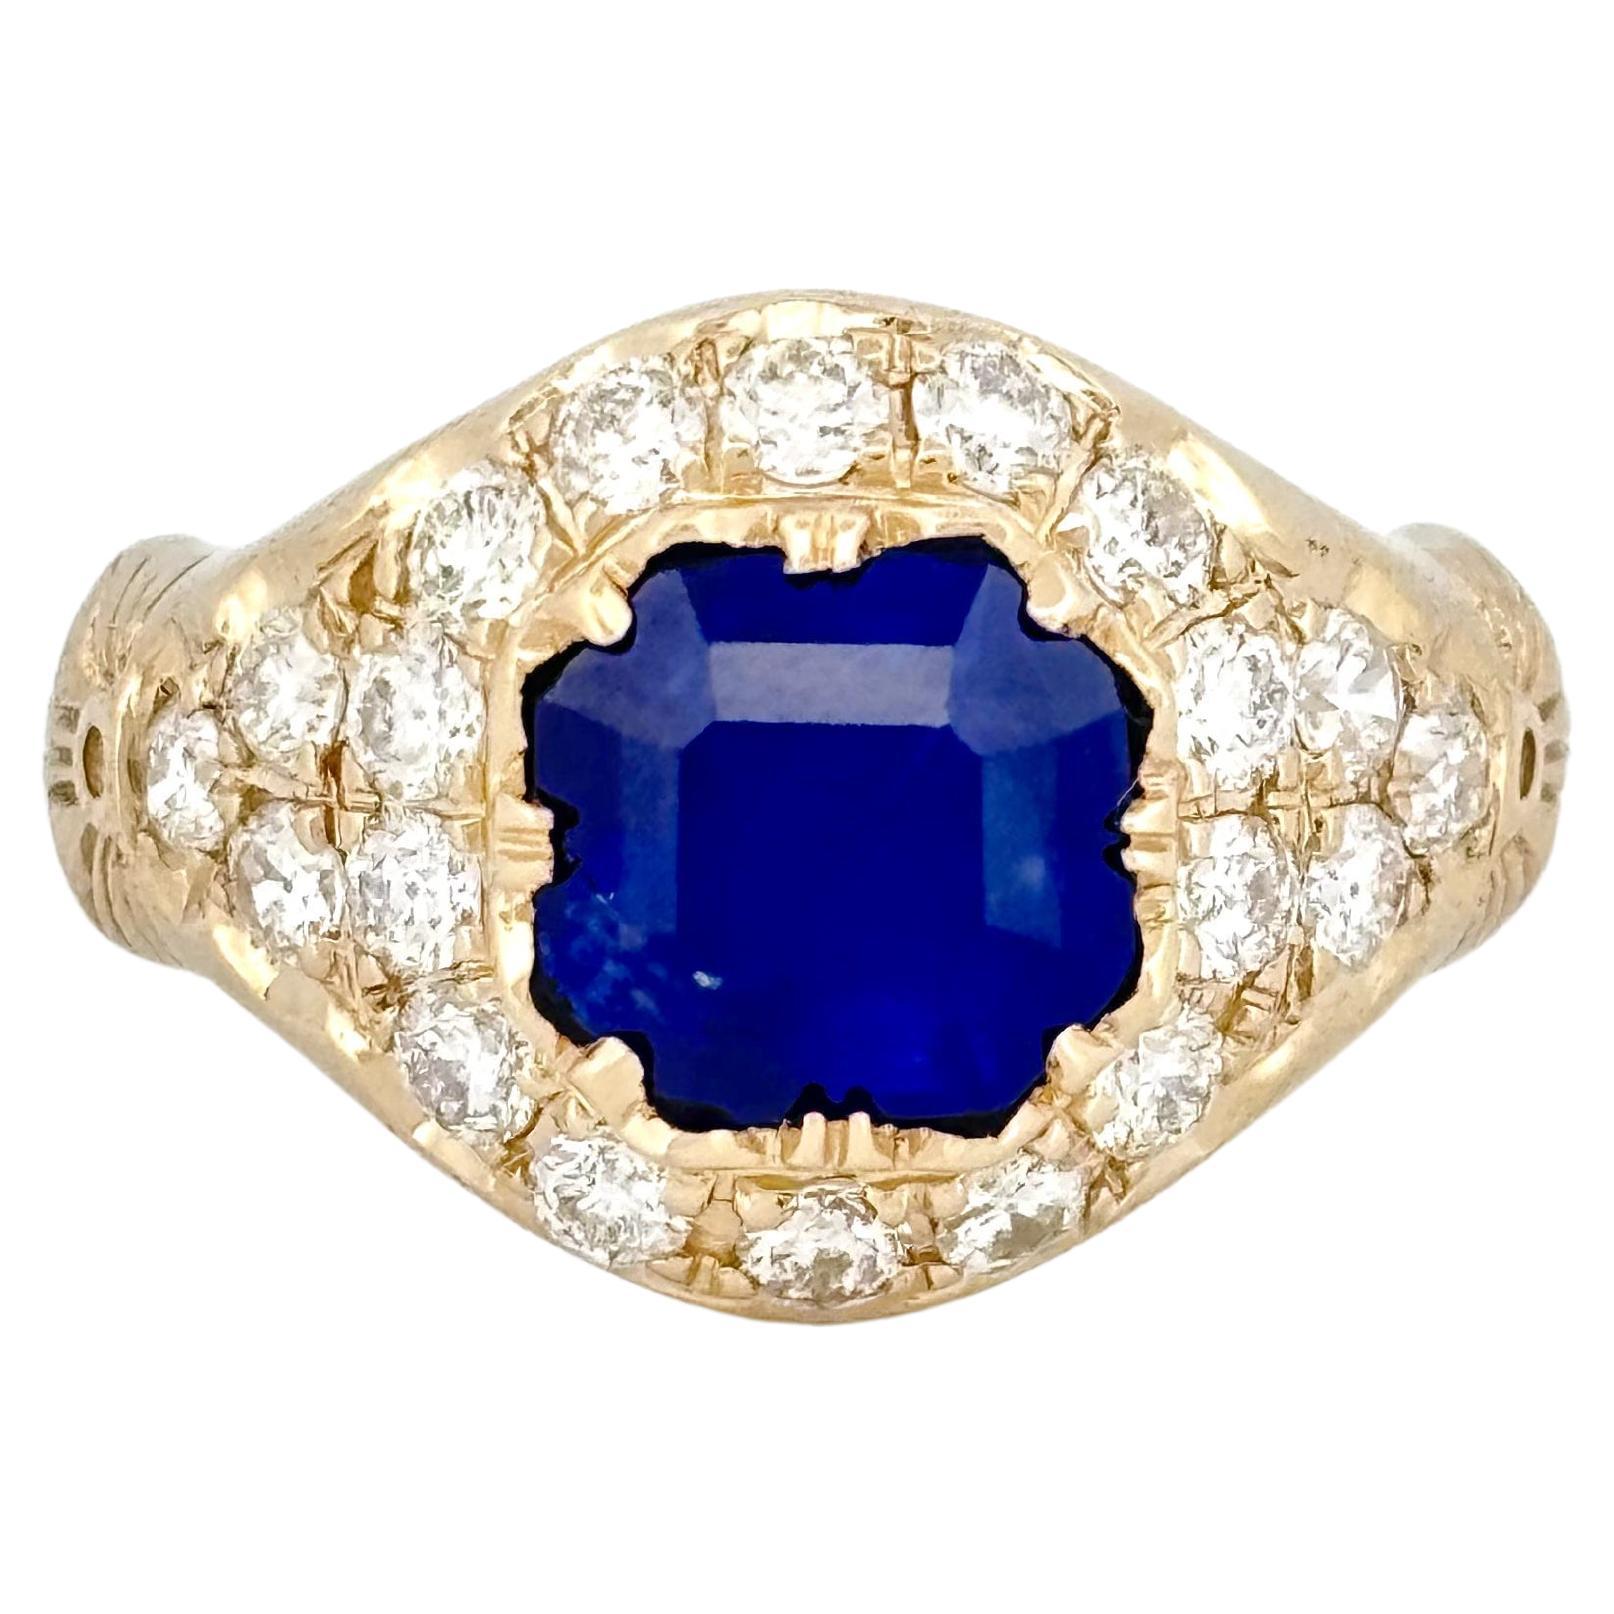   2.64 Carat Royal Blue Sapphire Ring with Old Mine Cut Diamonds in 18K Gold